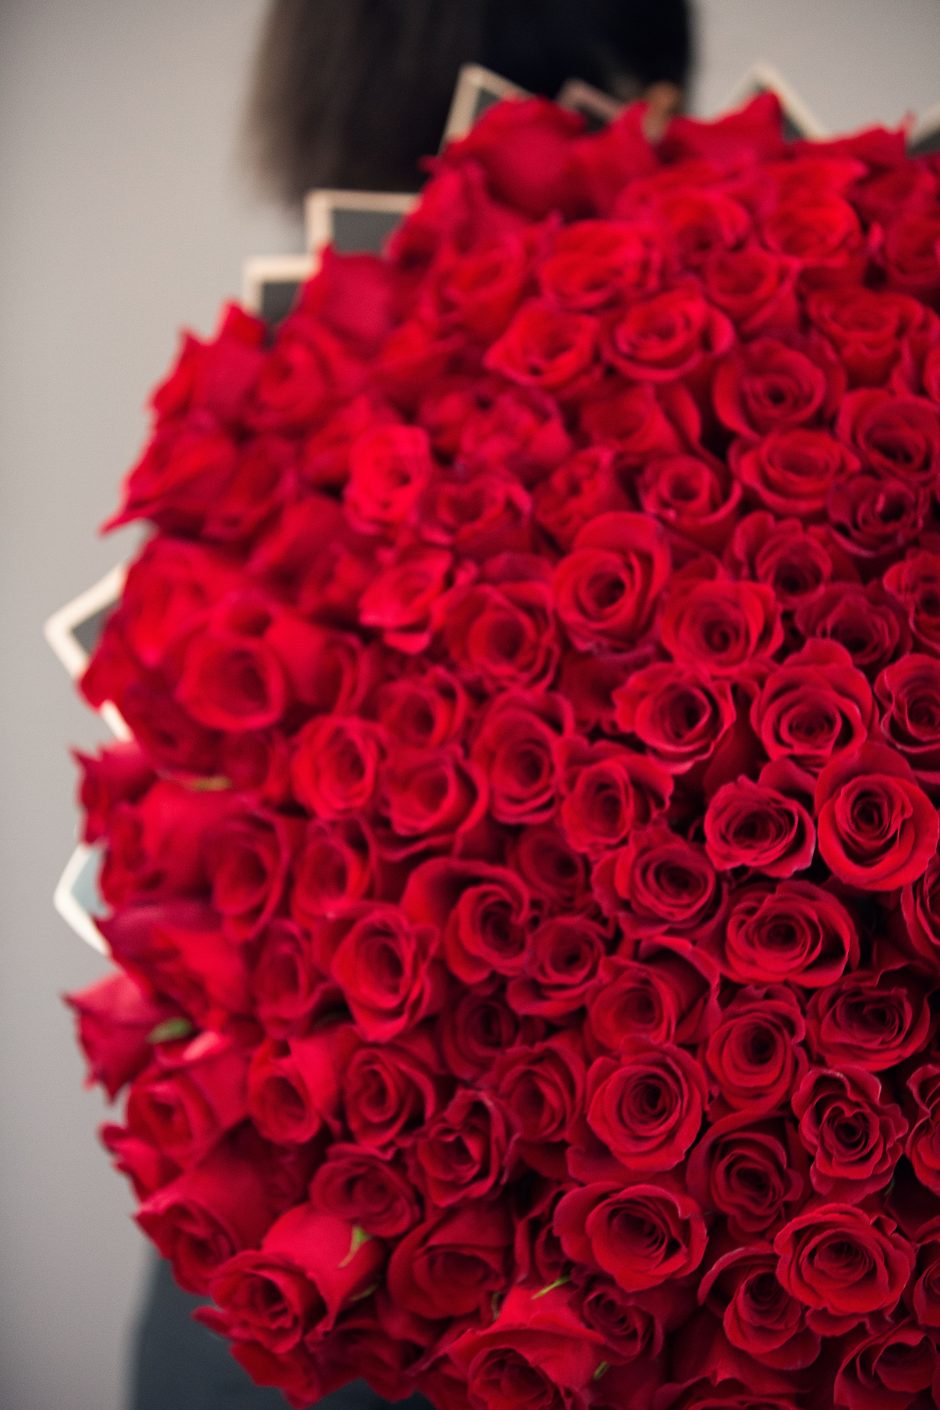 The 11 Best Roses in Passion Red Color - Article onThursd